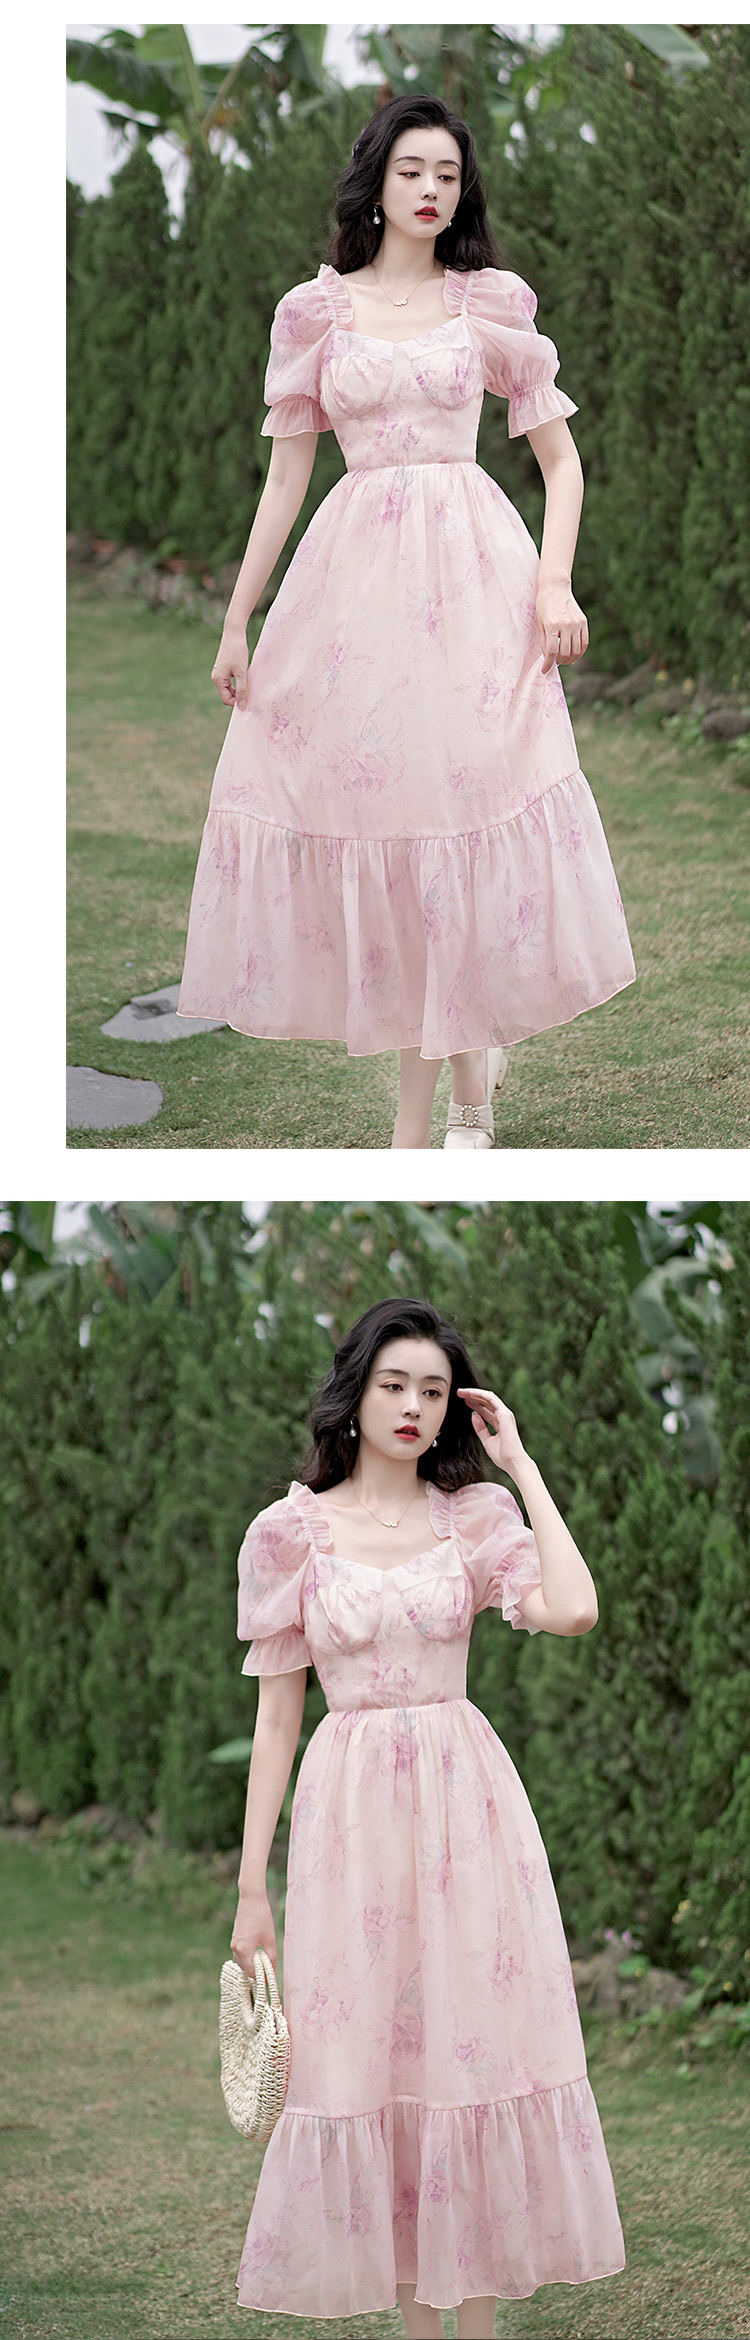 Sweet-French-Style-Pink-Square-Neck-Short-Sleeve-Casual-Dress10